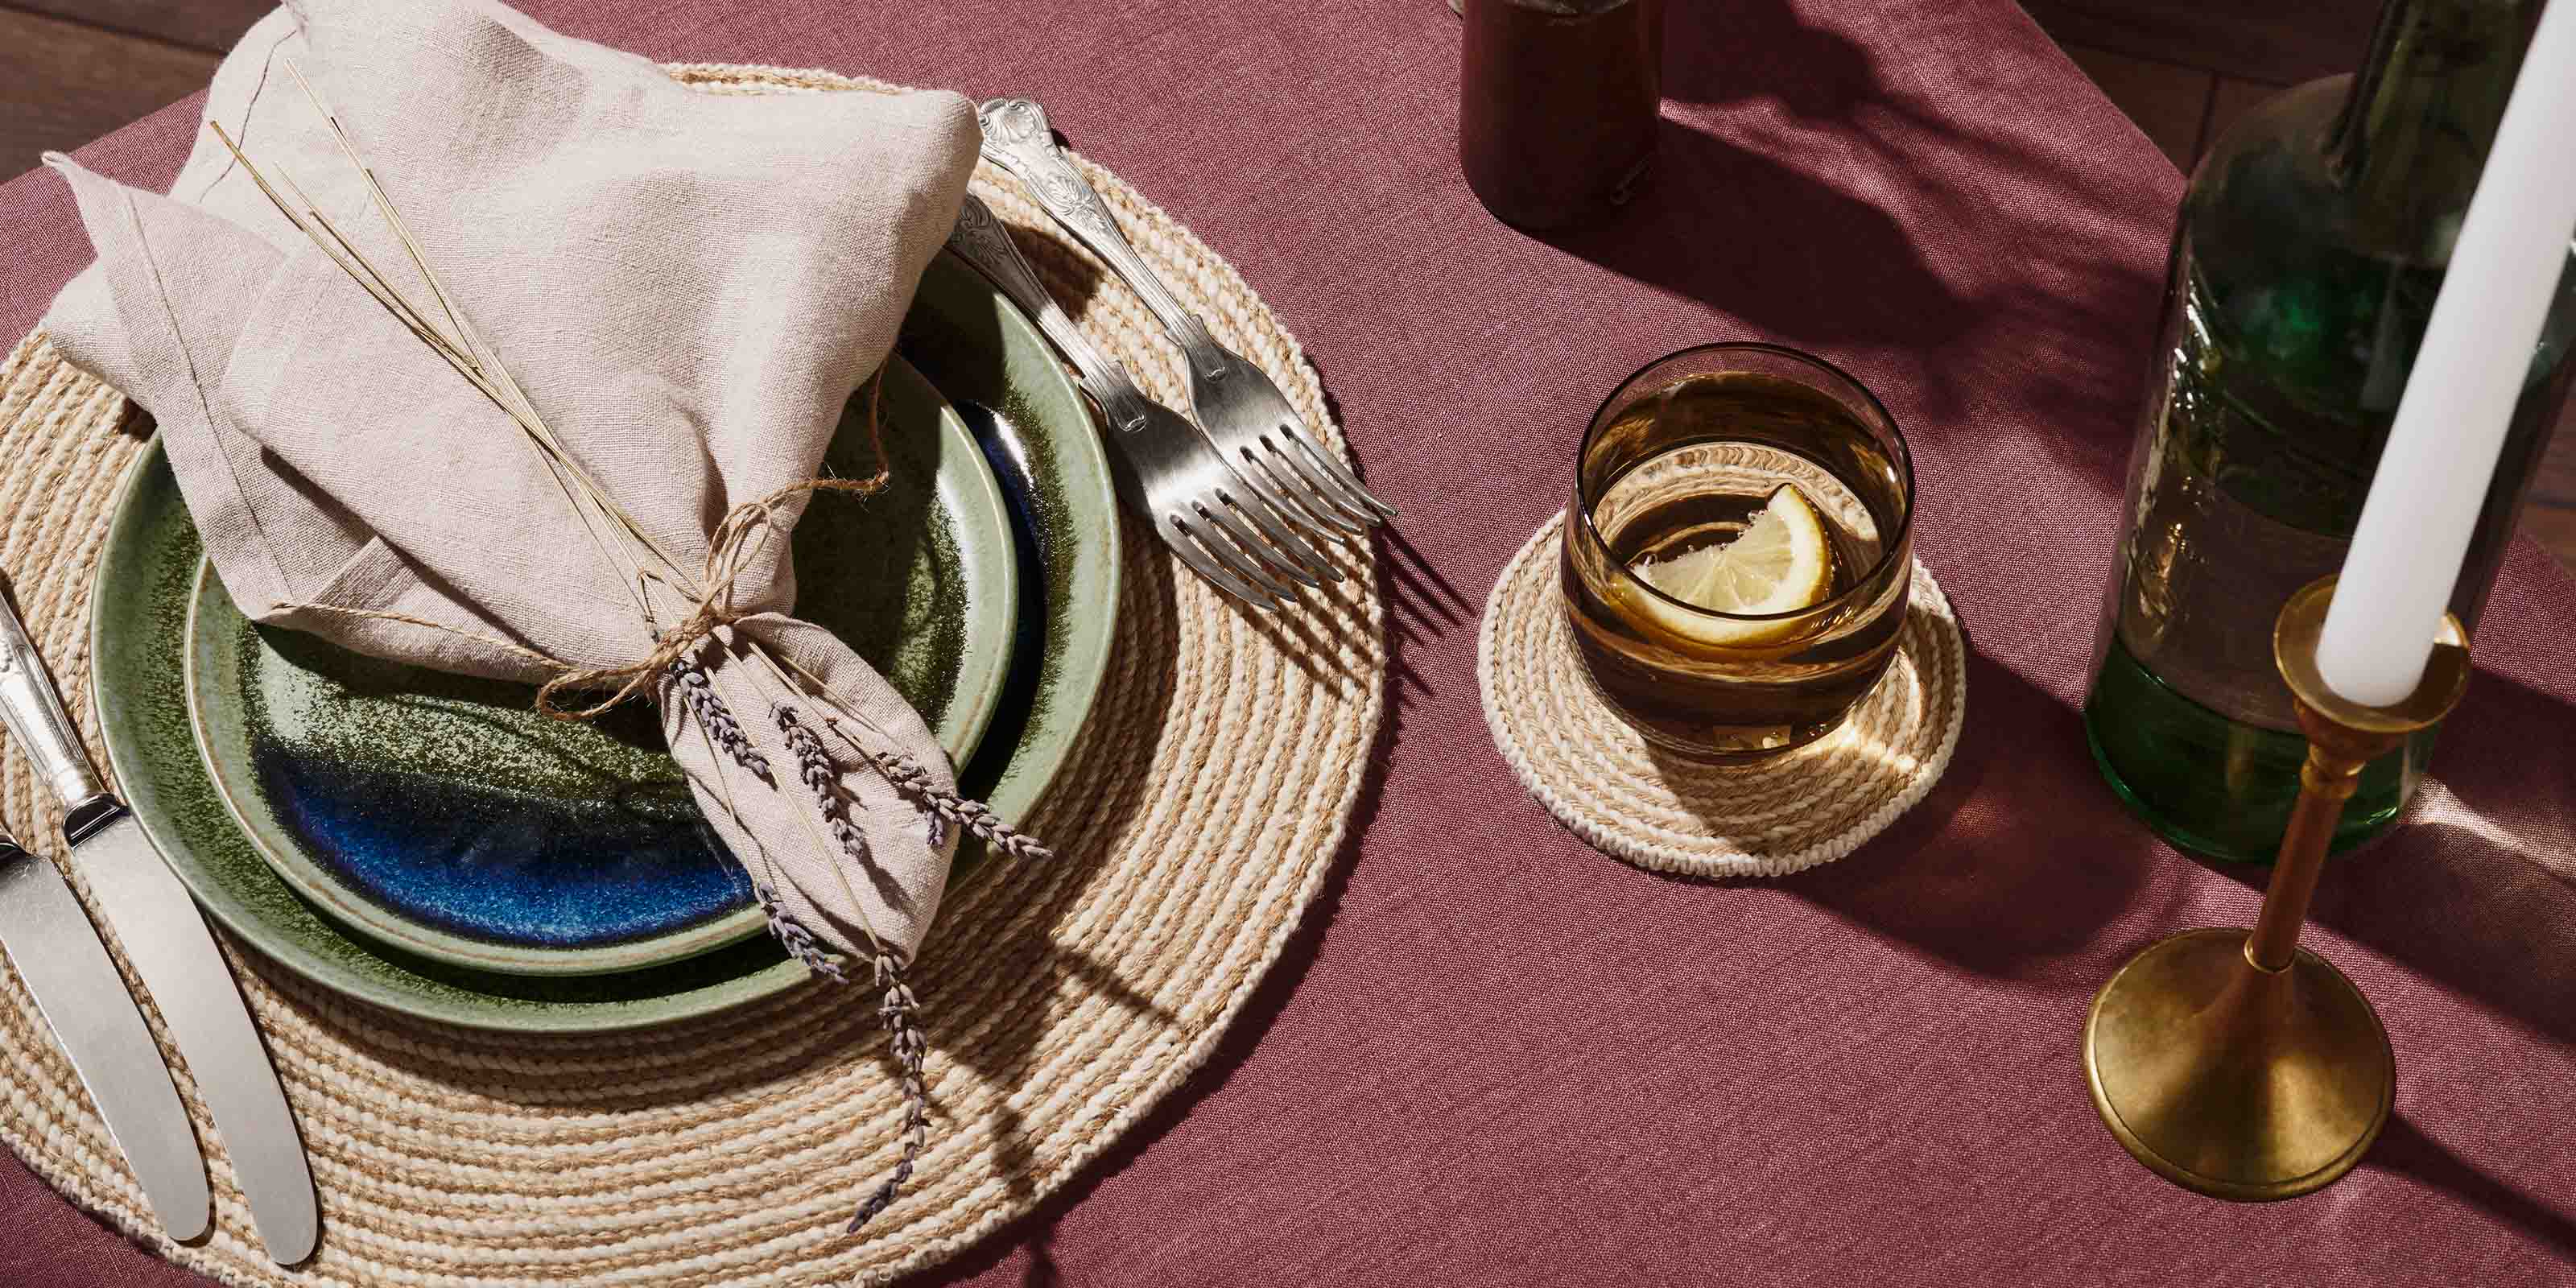 Top down image of a table setting with a handmade placemat, coaster, green and blue plates, brown glass, napkin wrapped with lavender, sliver cutlery, candlestick 